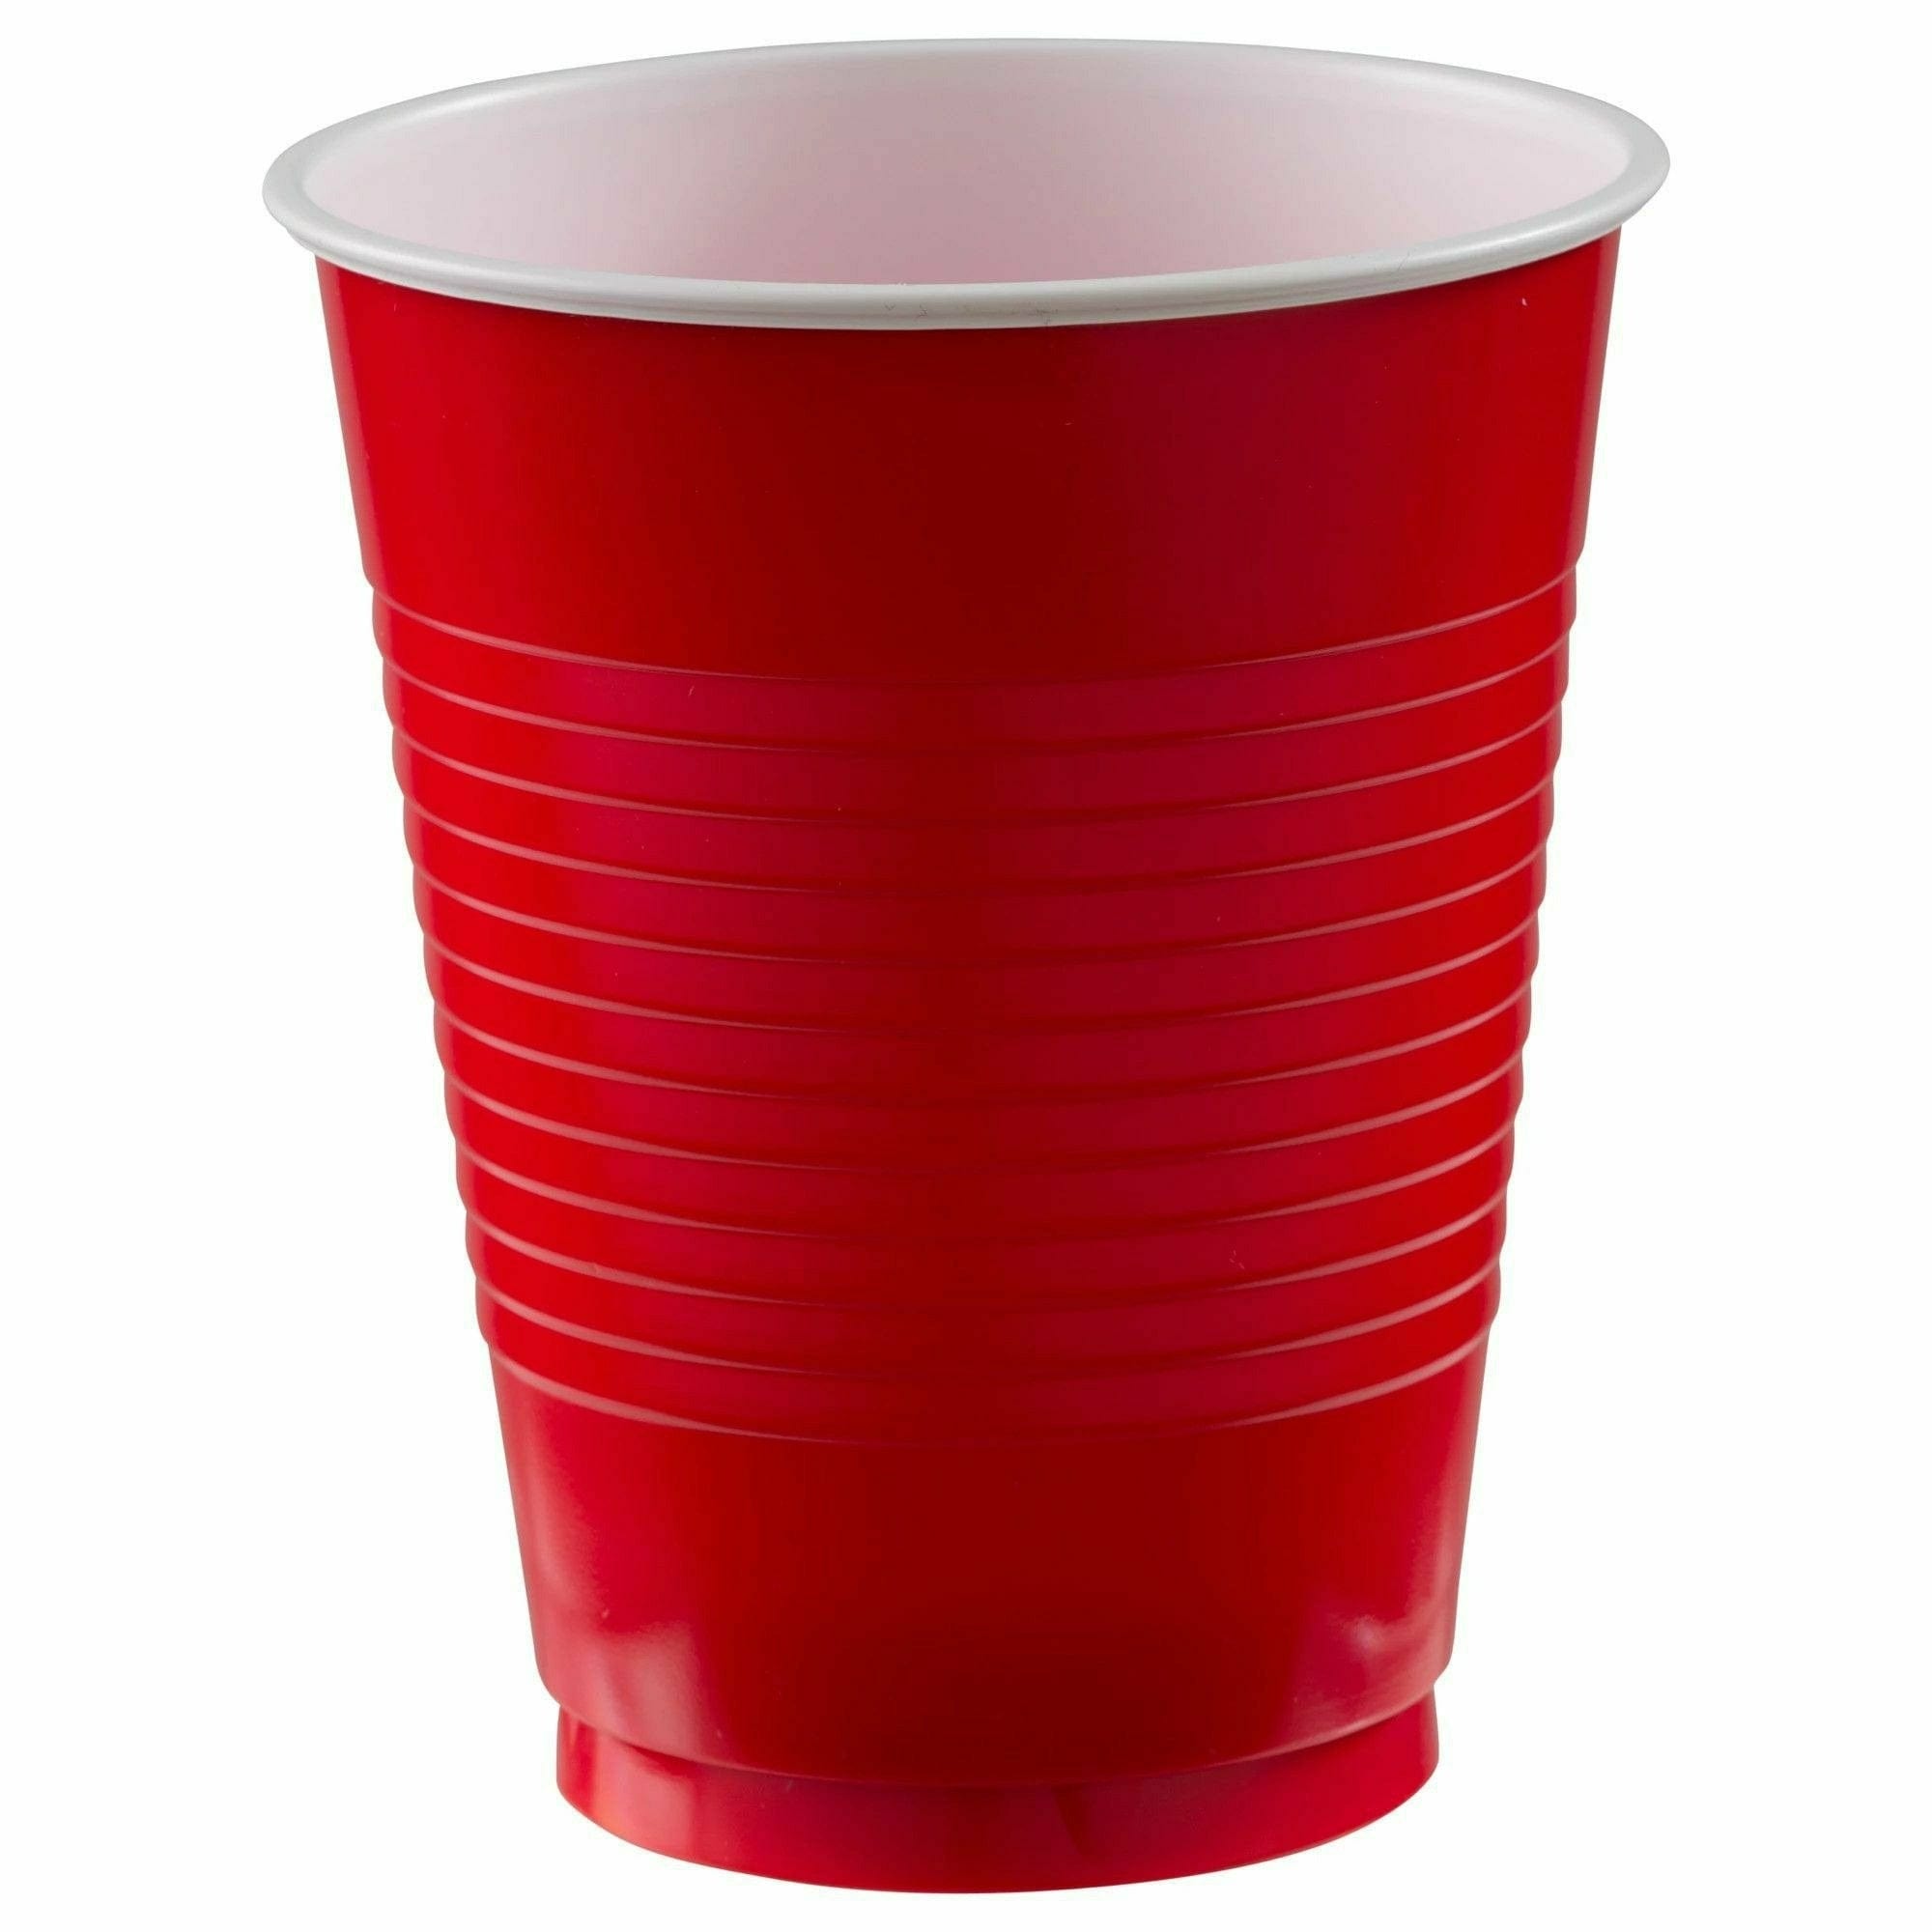 Amscan BASIC Apple Red - 18 oz. Plastic Cups, 20 Ct.